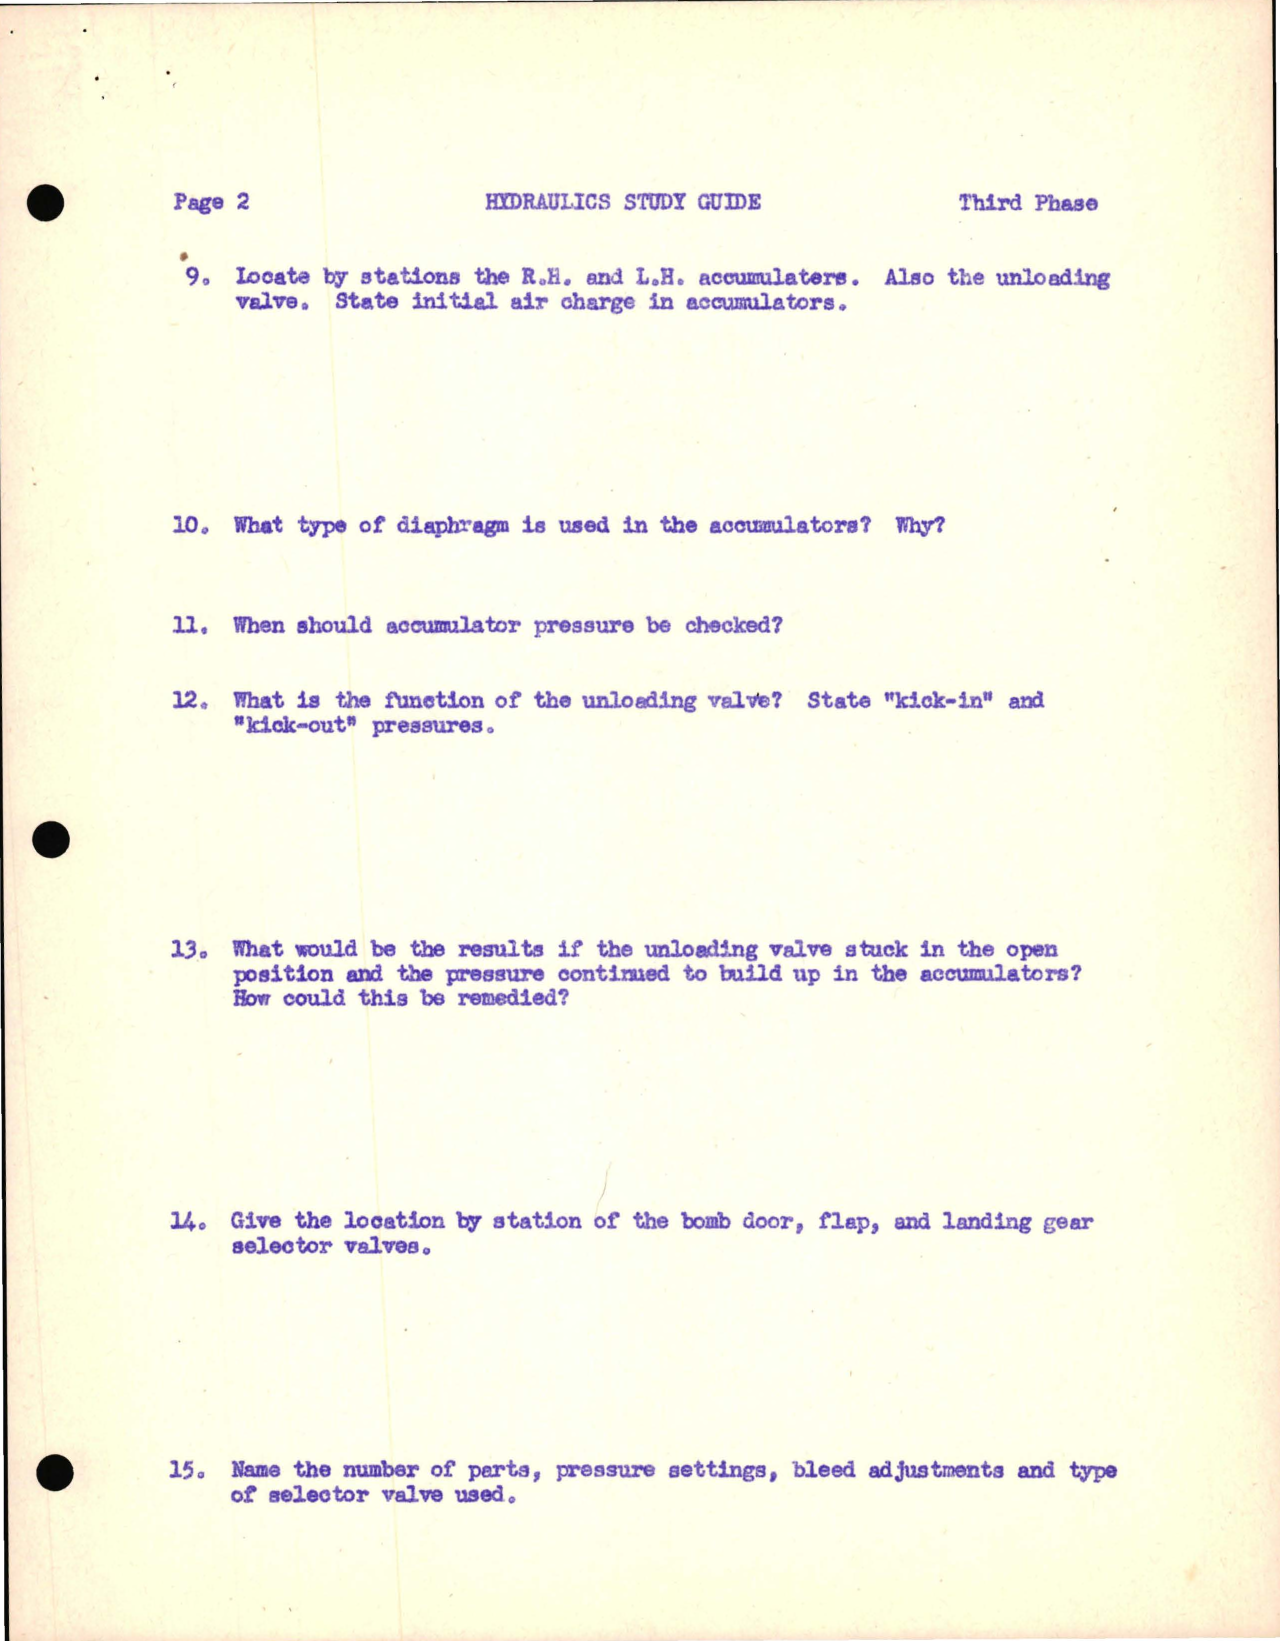 Sample page 5 from AirCorps Library document: Study Guide for Hydraulics, Consolidated Aircraft - Third Phase